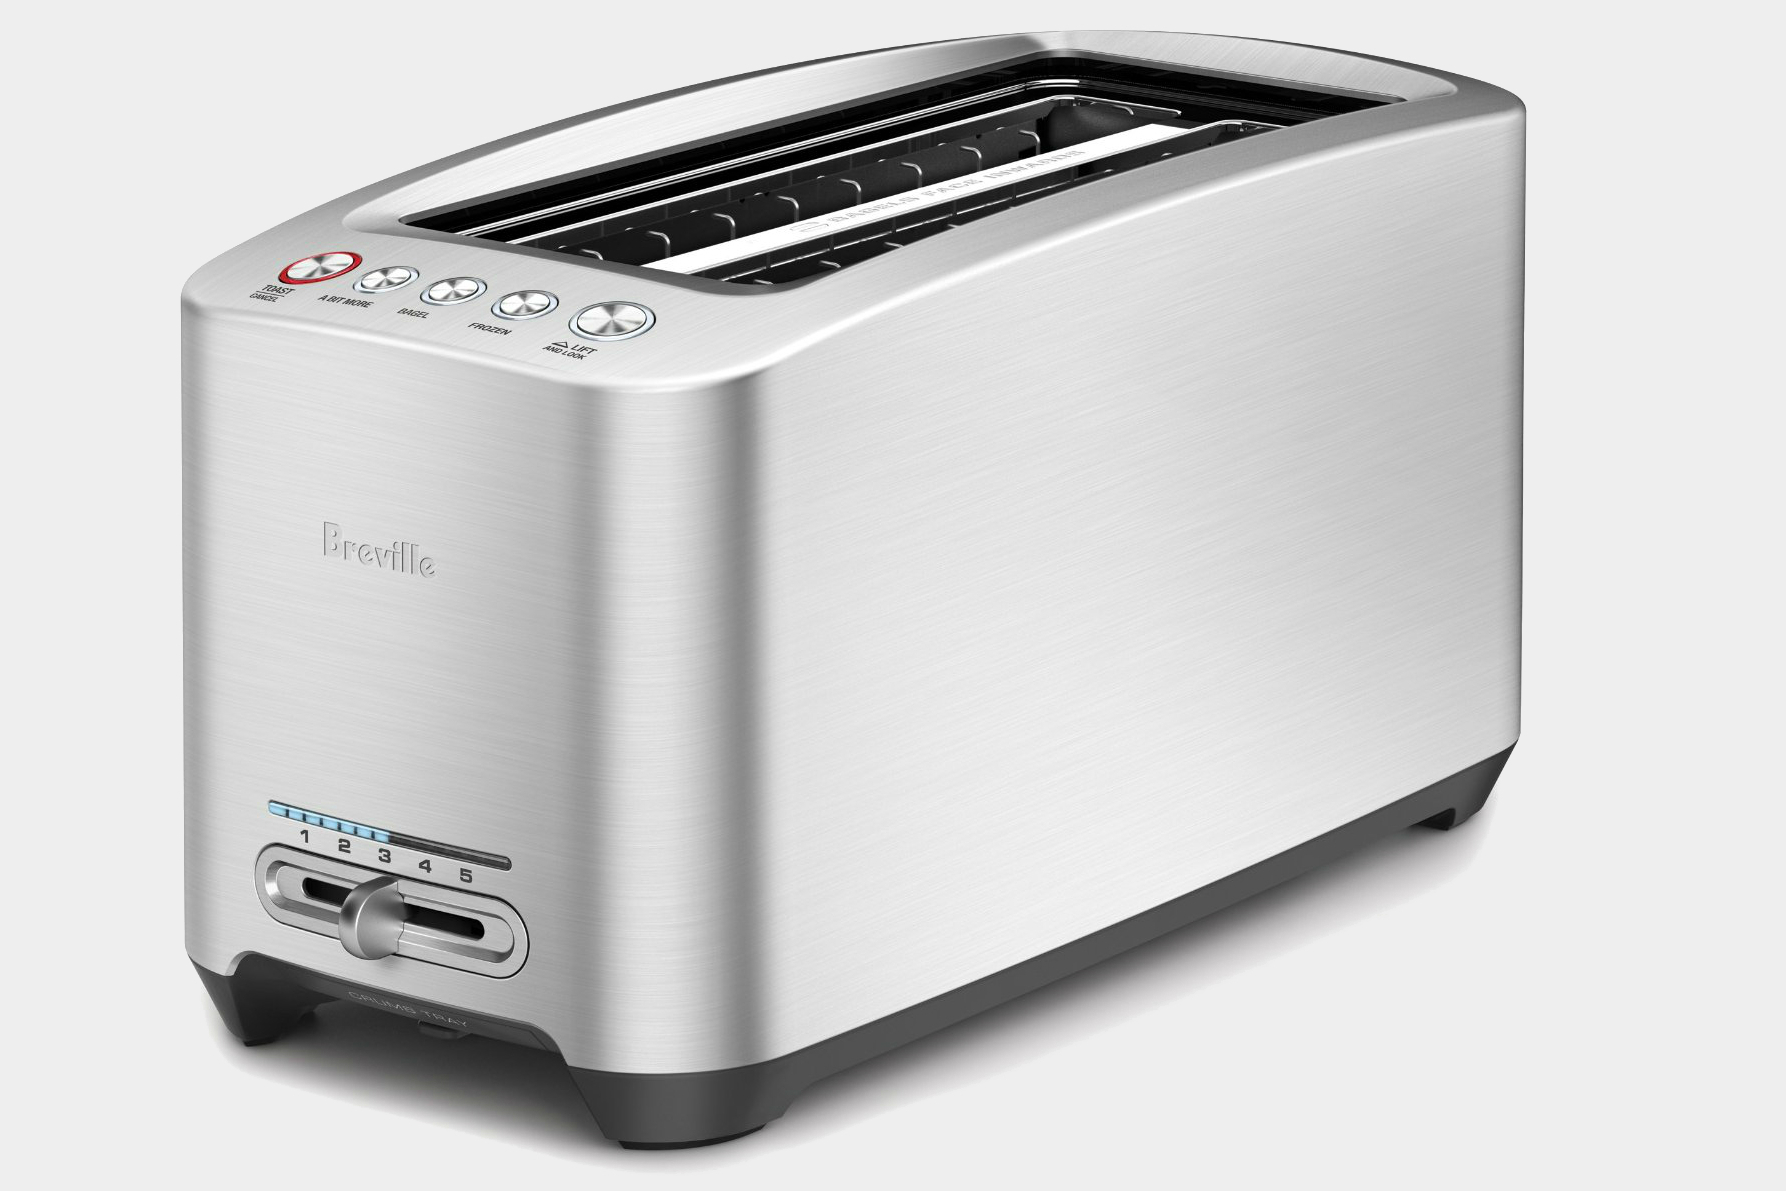 Maxi-Matic Elite Gourmet 4-Slice Long Slot Cool-Touch Toaster